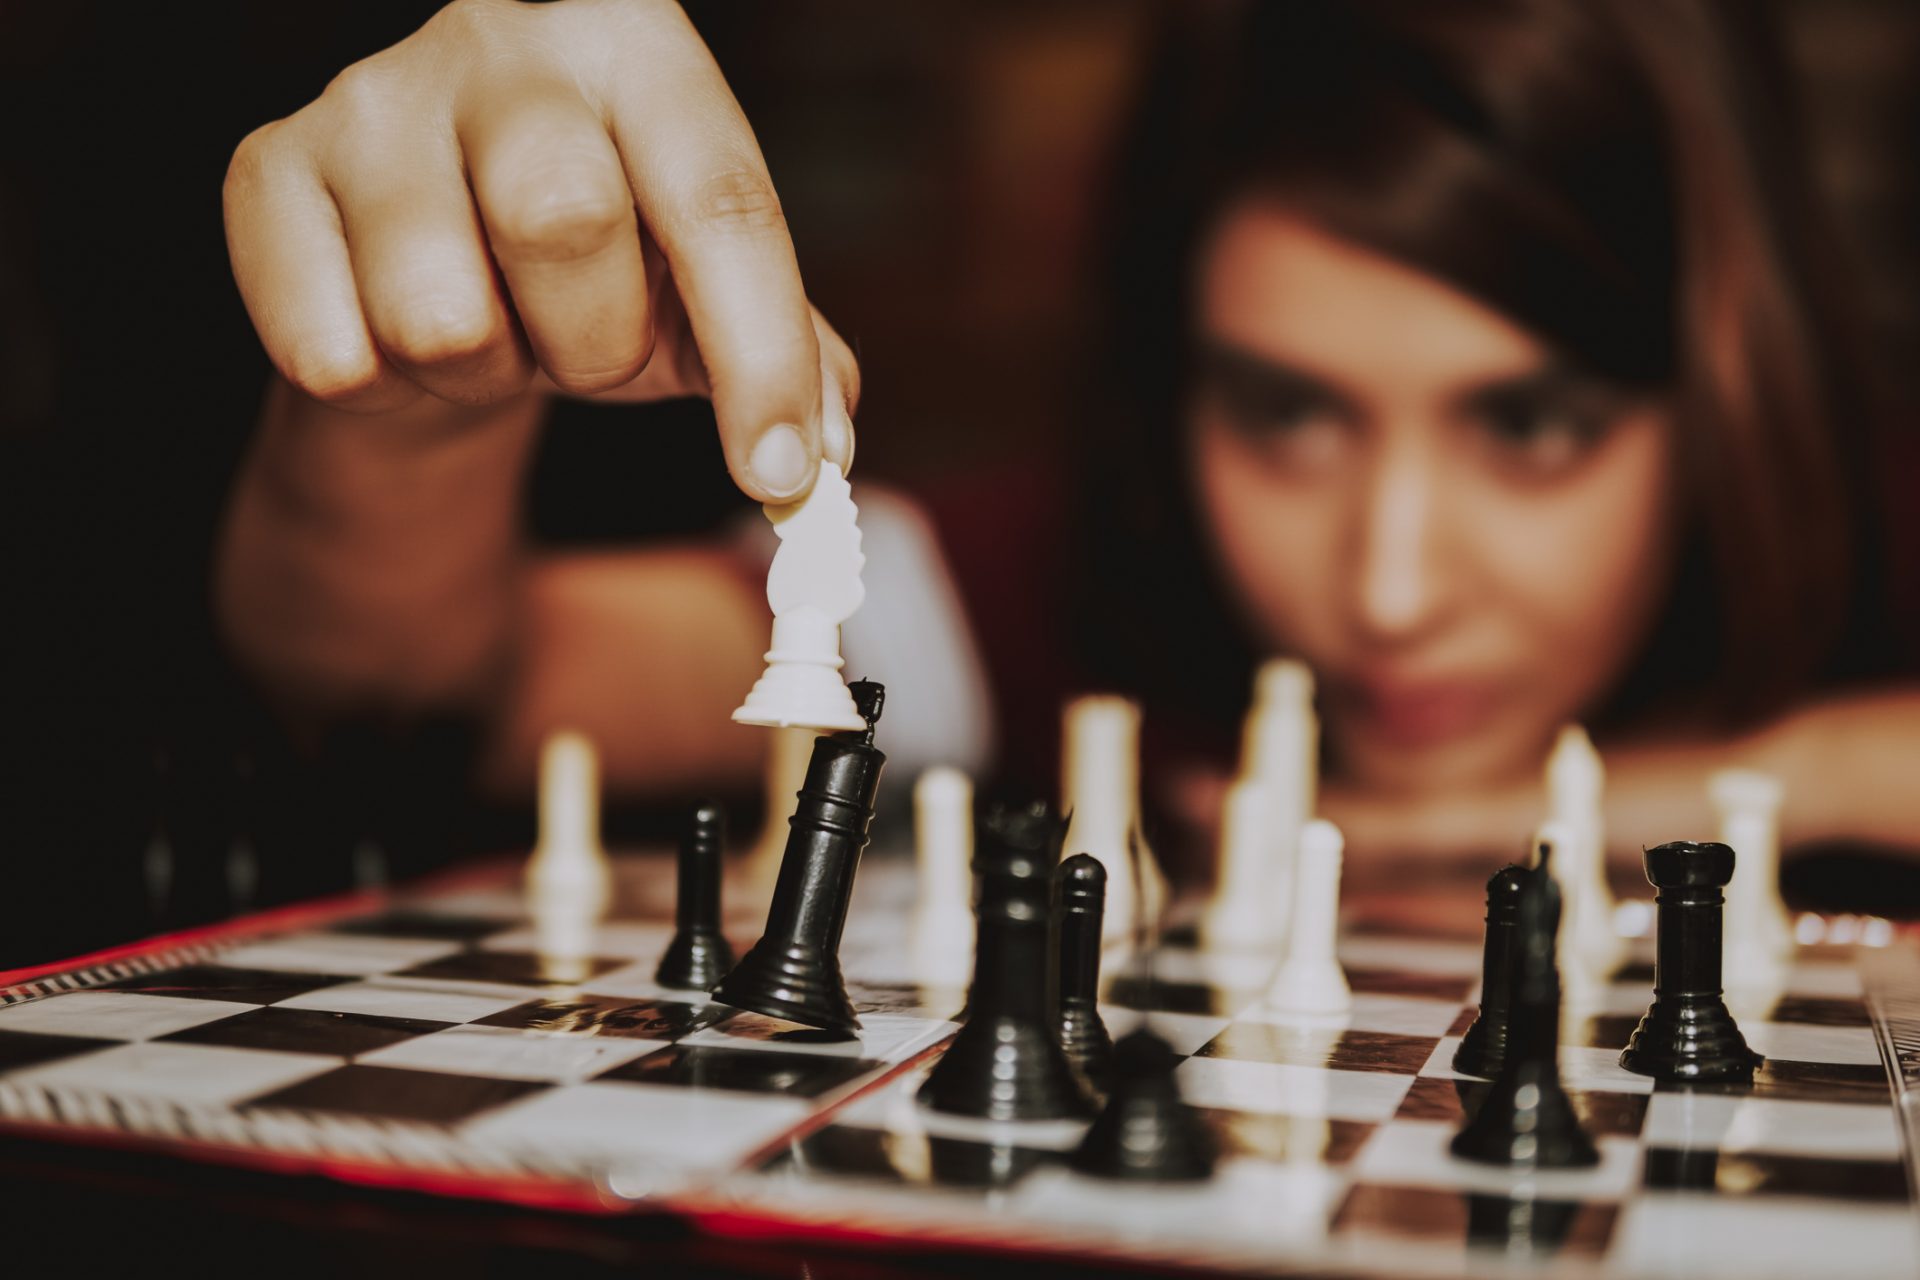 'I spent my chess career being told women's brains were smaller'